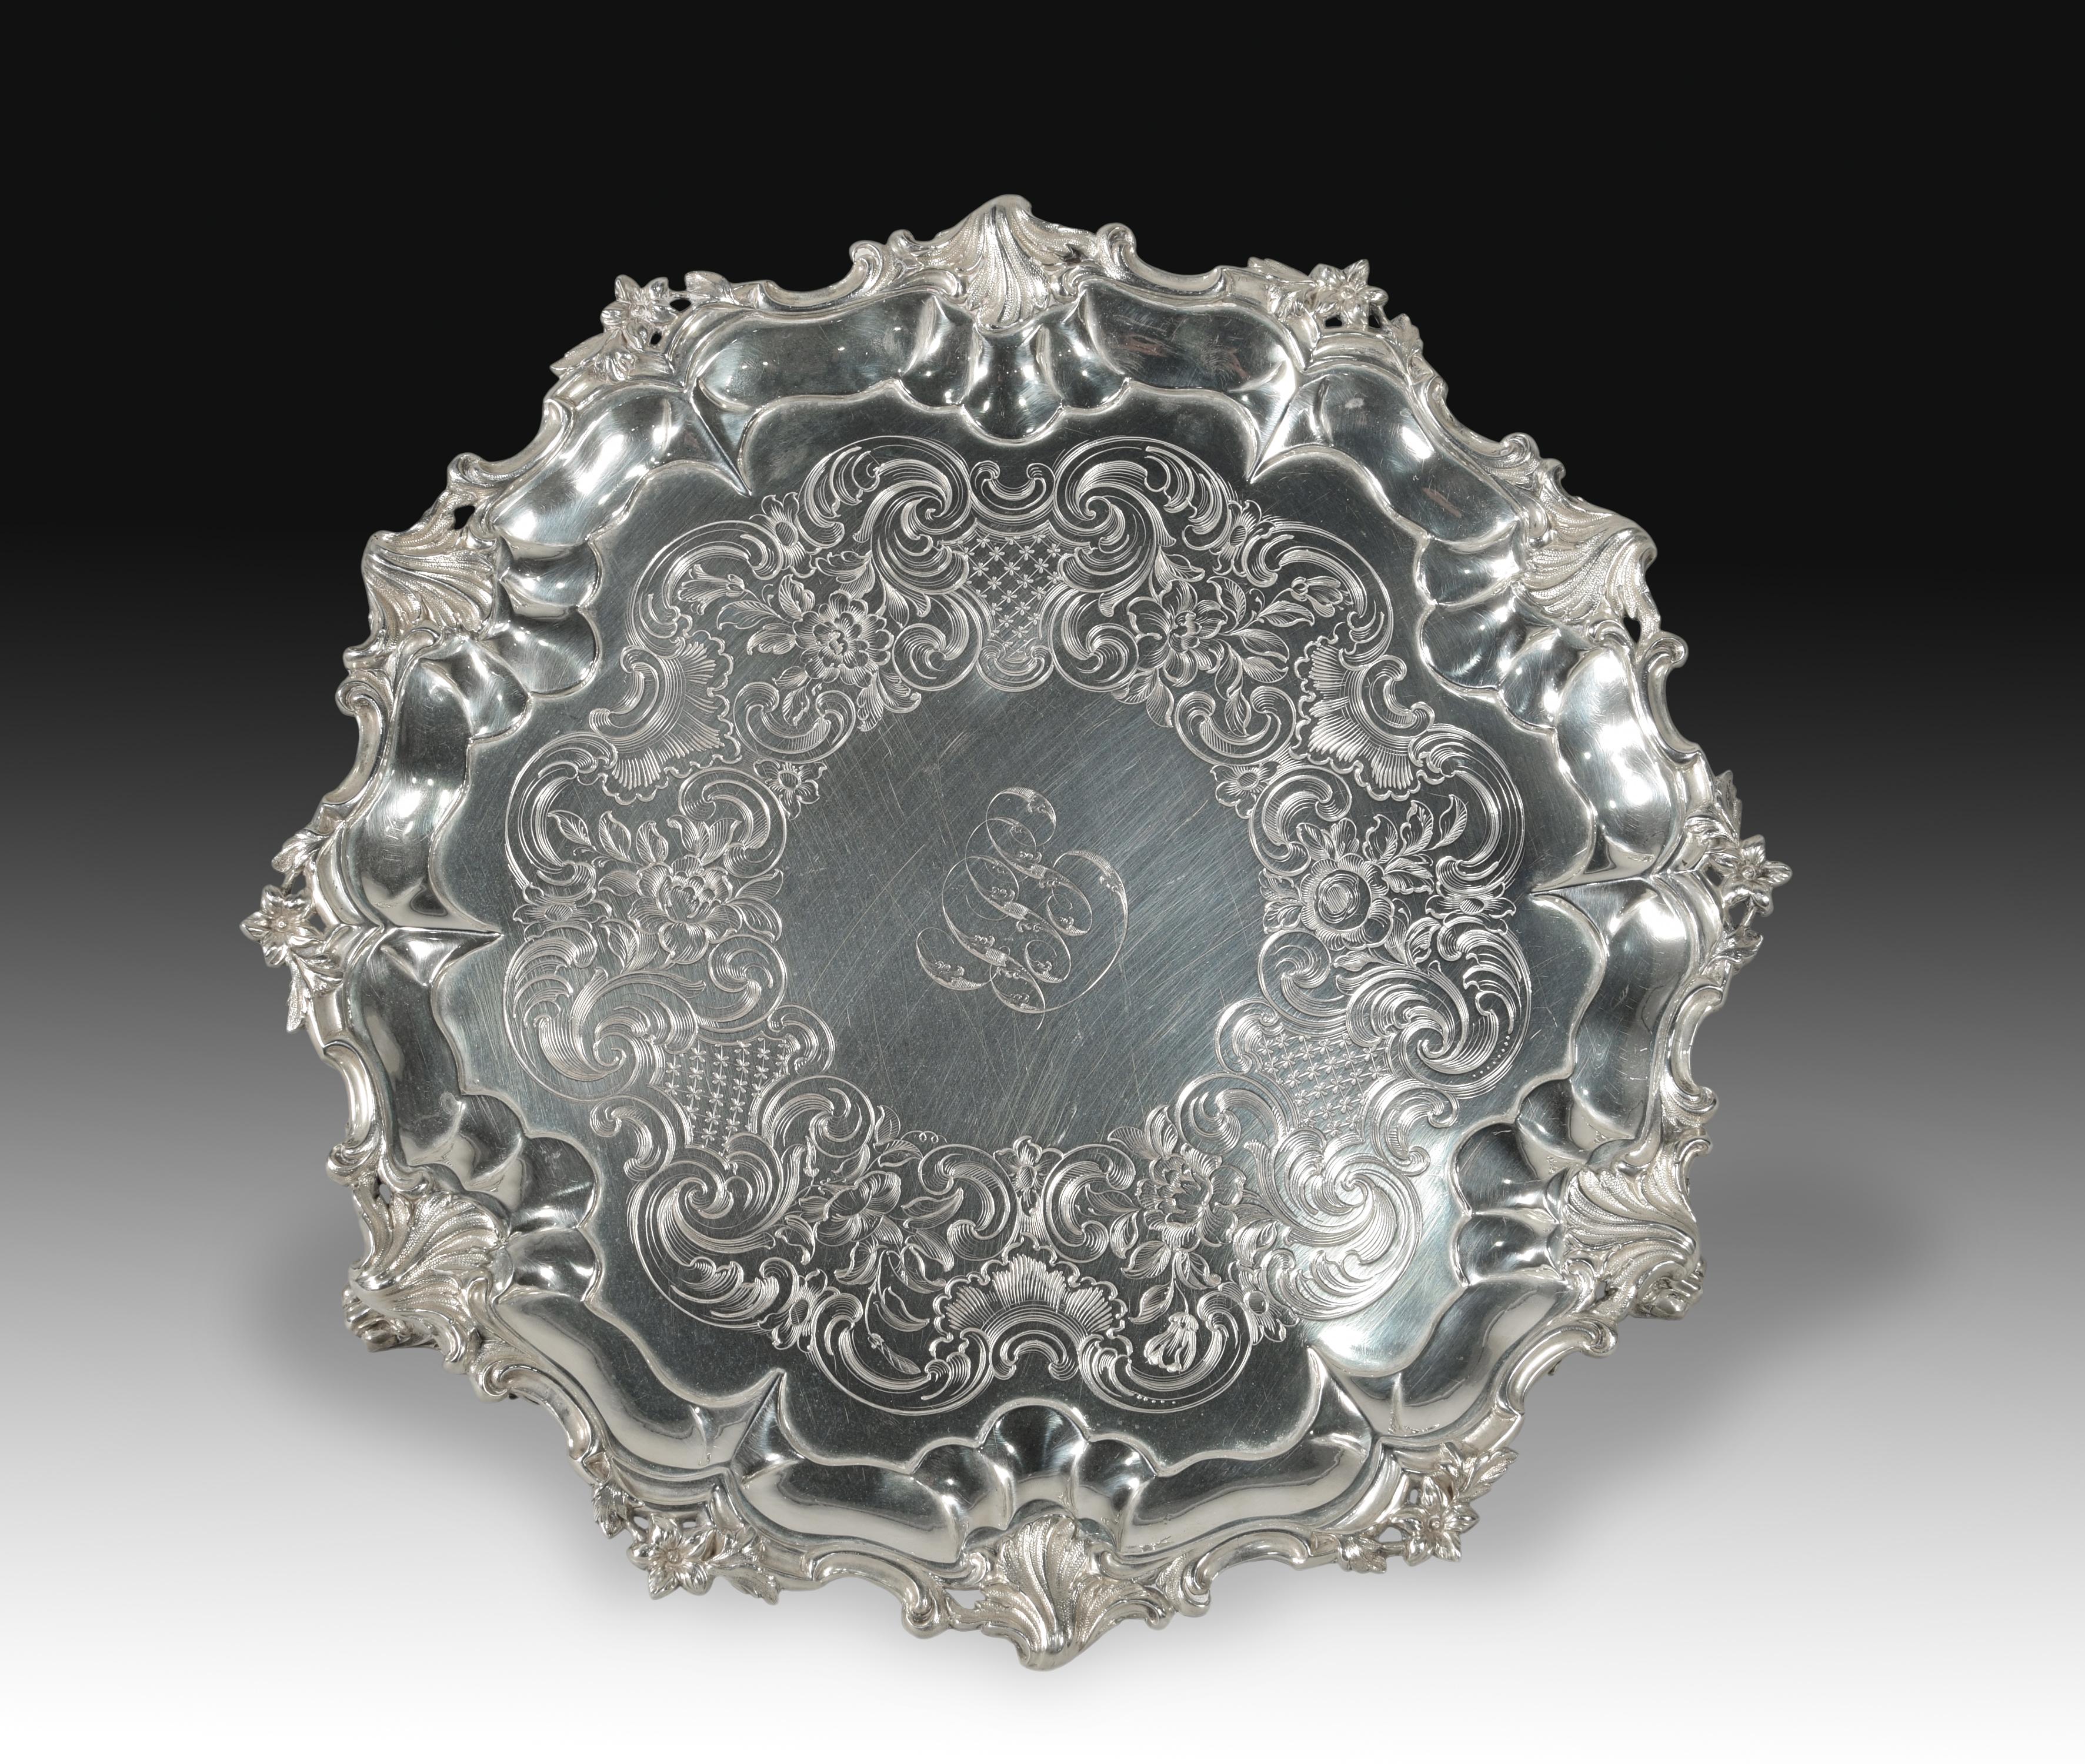 Salver. Silver. Edward, John & William Barnard. England, London, 1862. With contrast markings.
Round salvilla with mixed contours decorated with elements in slight relief towards the edge and engravings towards the center, arranged around initials,